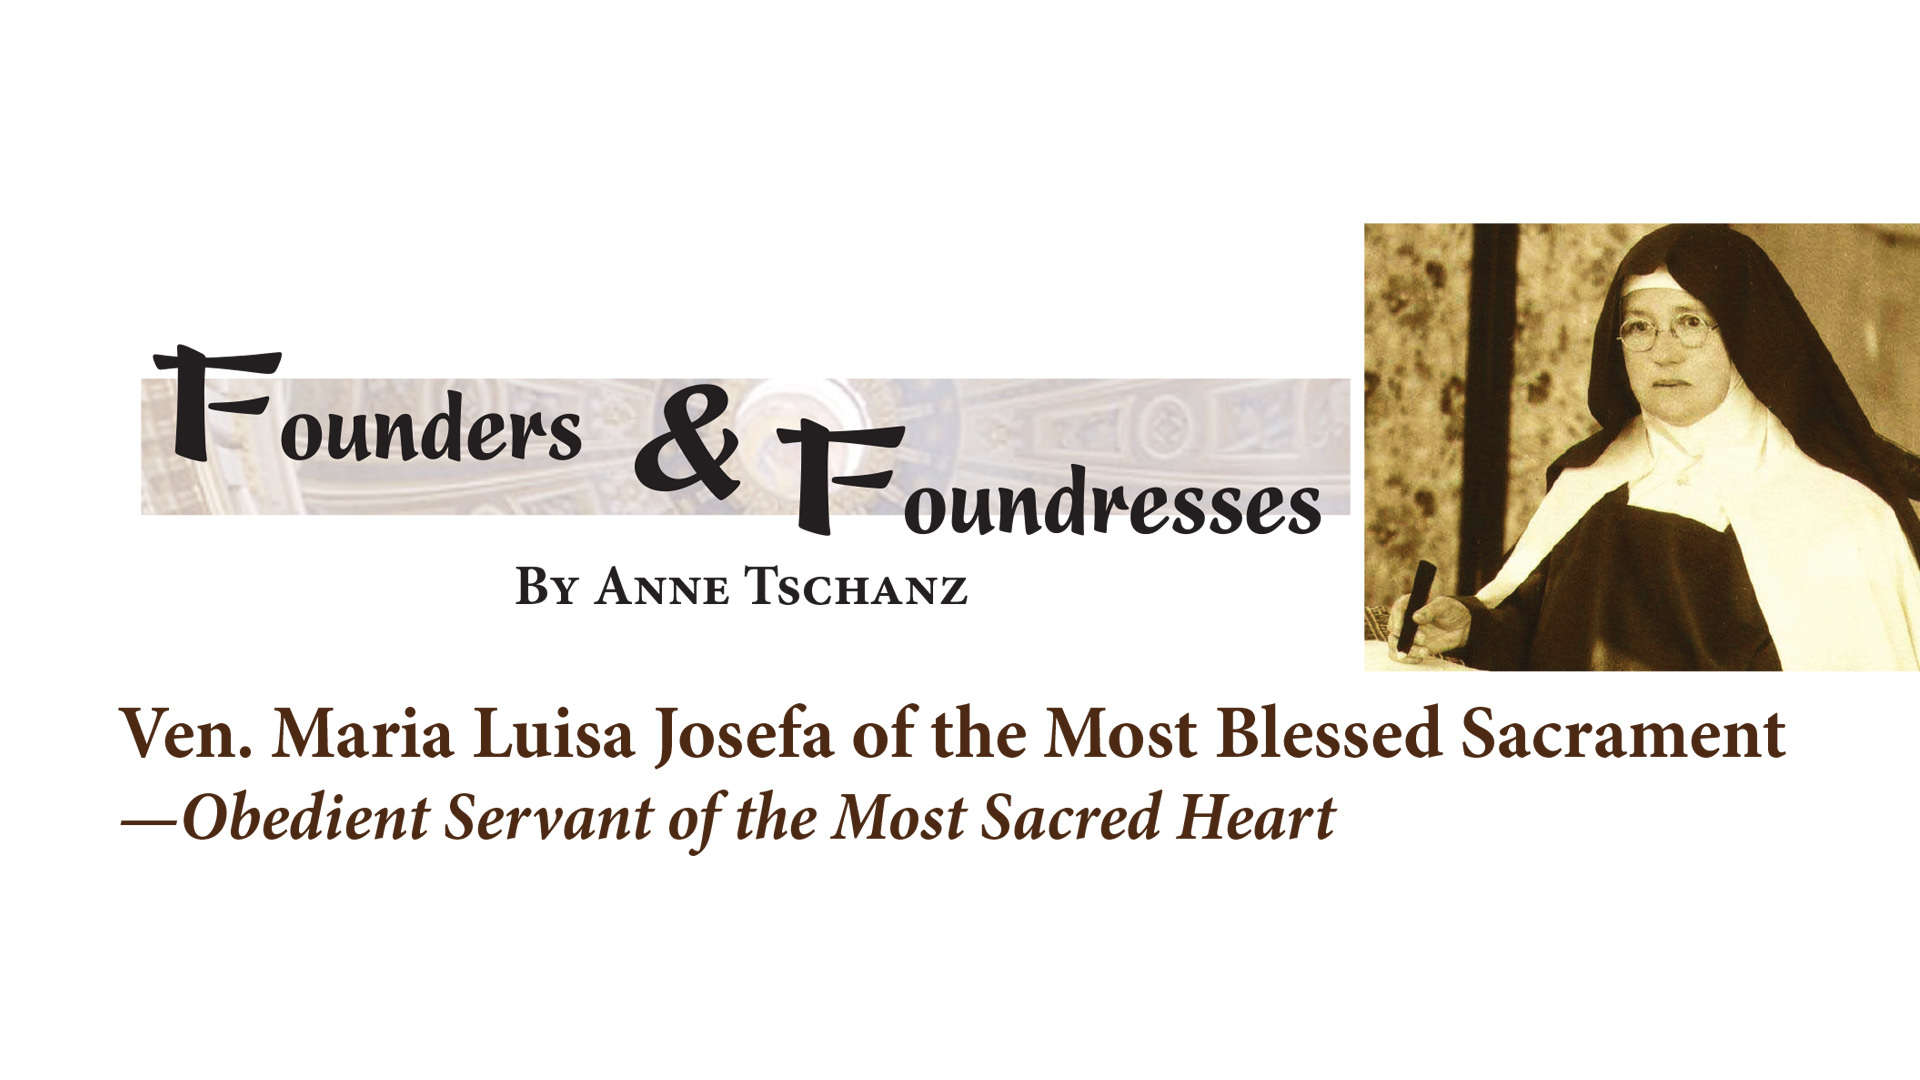 Image of Mother Luisita, 'Founders and Foundresses by Anne Tschanz' "Ven. Maria luisa Josefa of the Most Blessed Sacrament - Obedient Servant of the Most Sacred Heart'